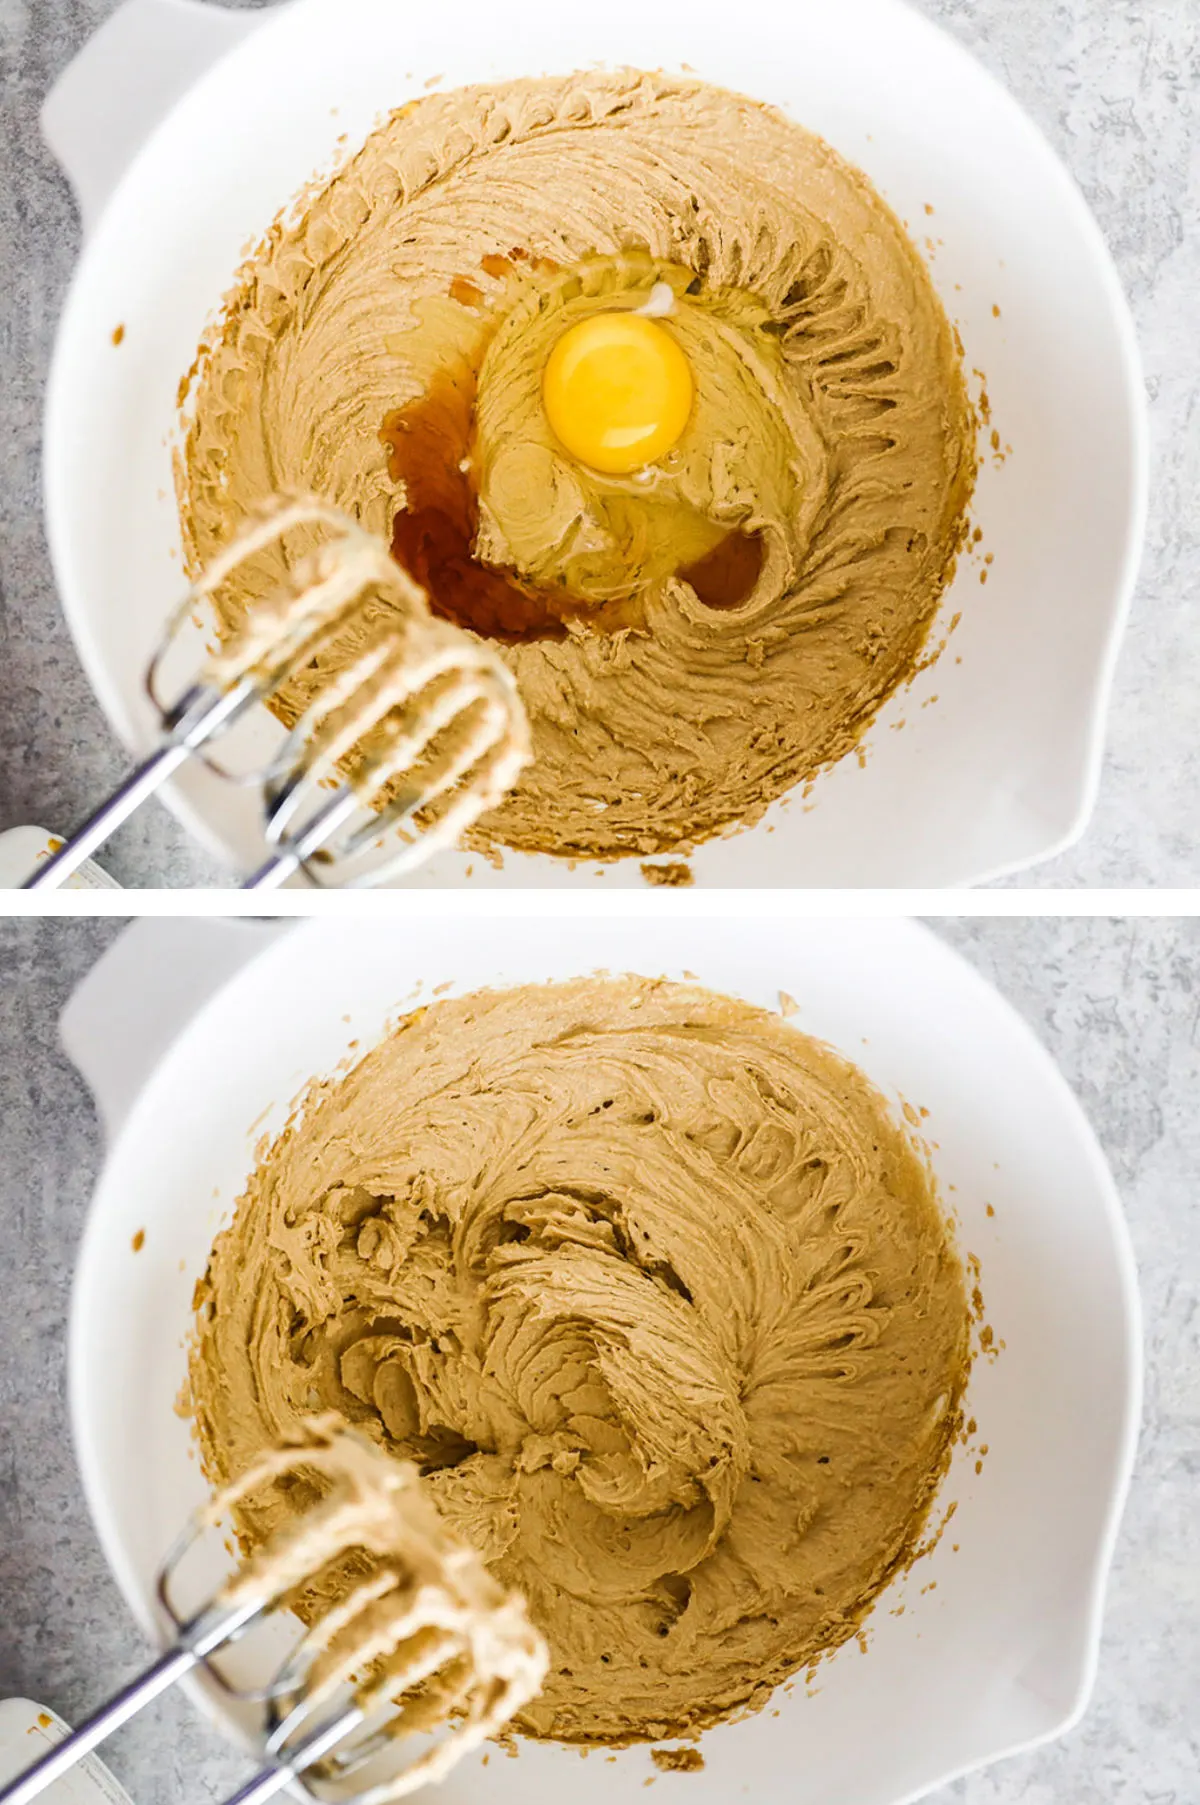 Two overhead images in one: 1. One egg and vanilla extract are added to the bowl. 2. Egg and vanilla are mixed in. 